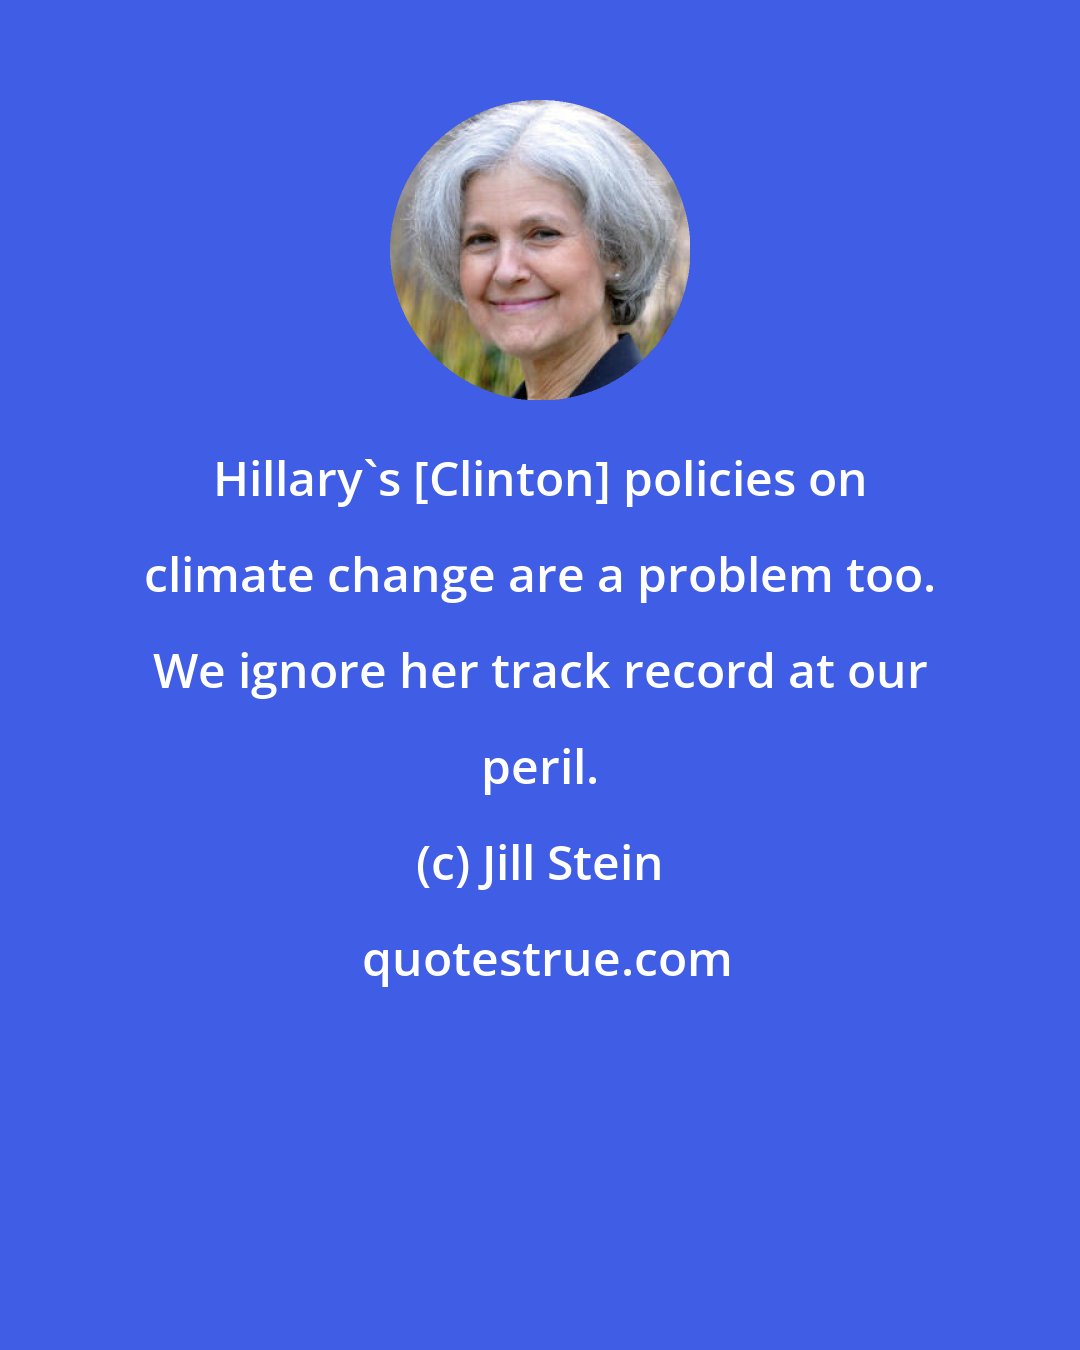 Jill Stein: Hillary's [Clinton] policies on climate change are a problem too. We ignore her track record at our peril.